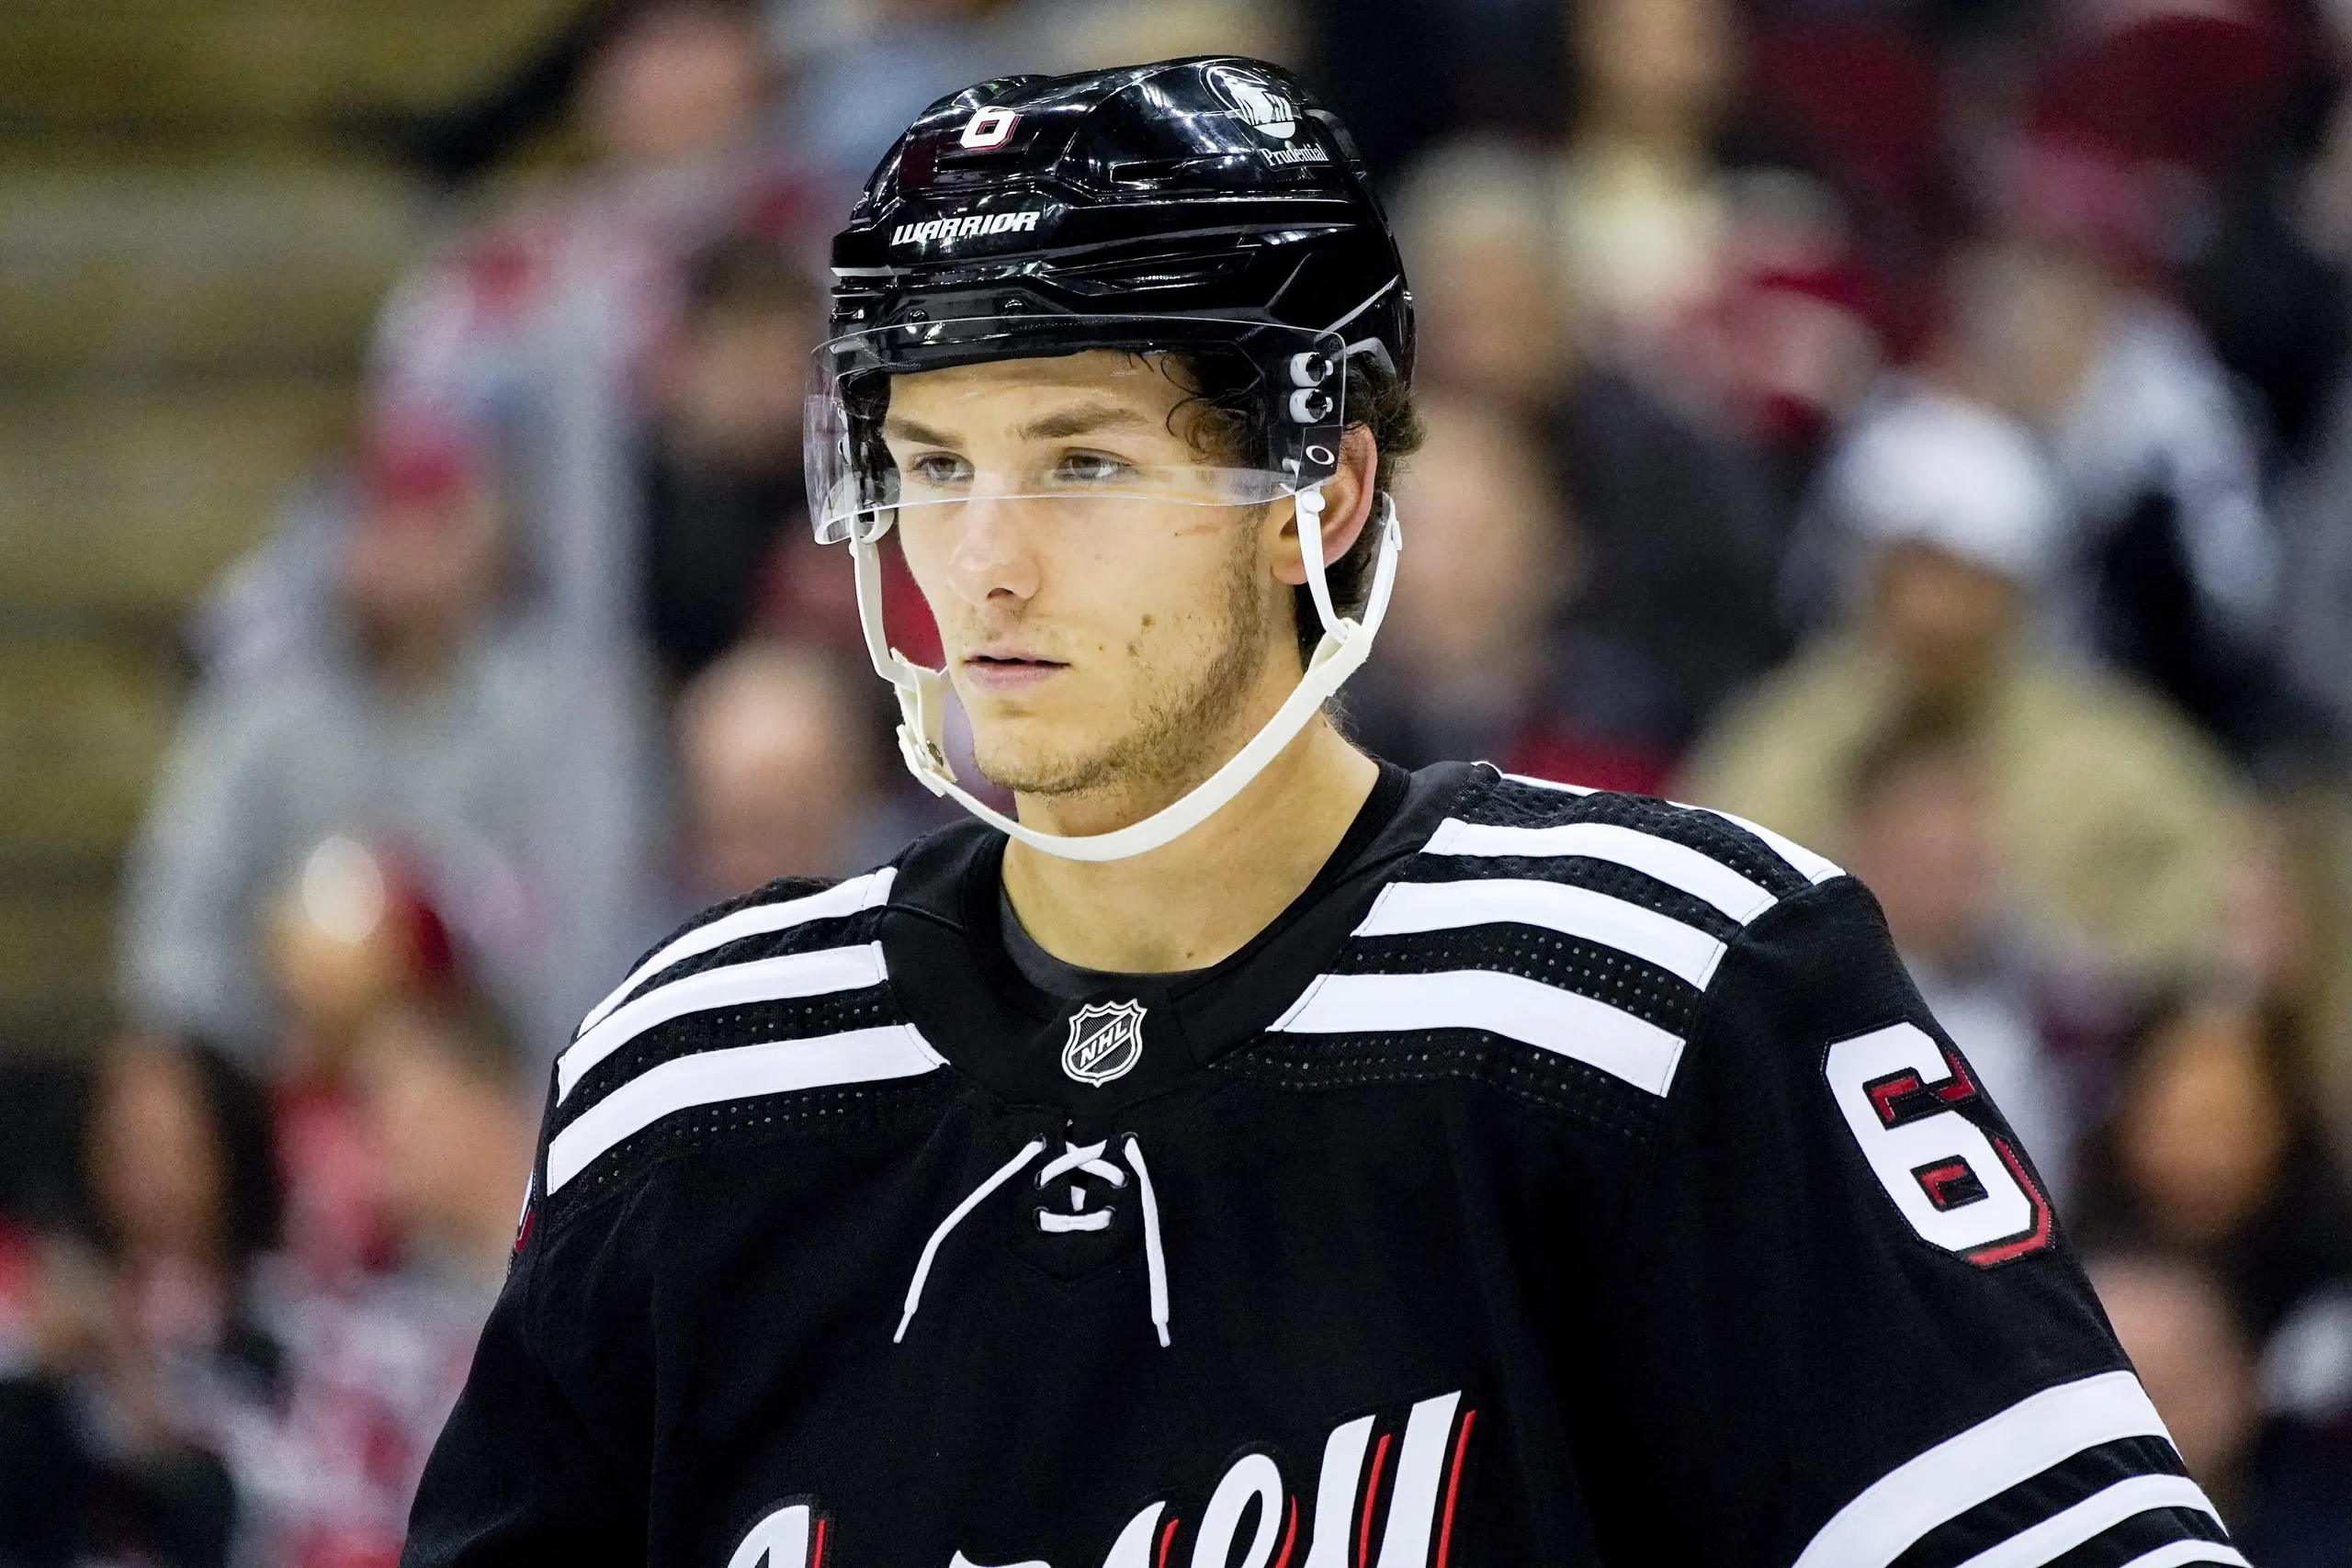 NHL Predictions: March 12 with Hurricanes vs Devils